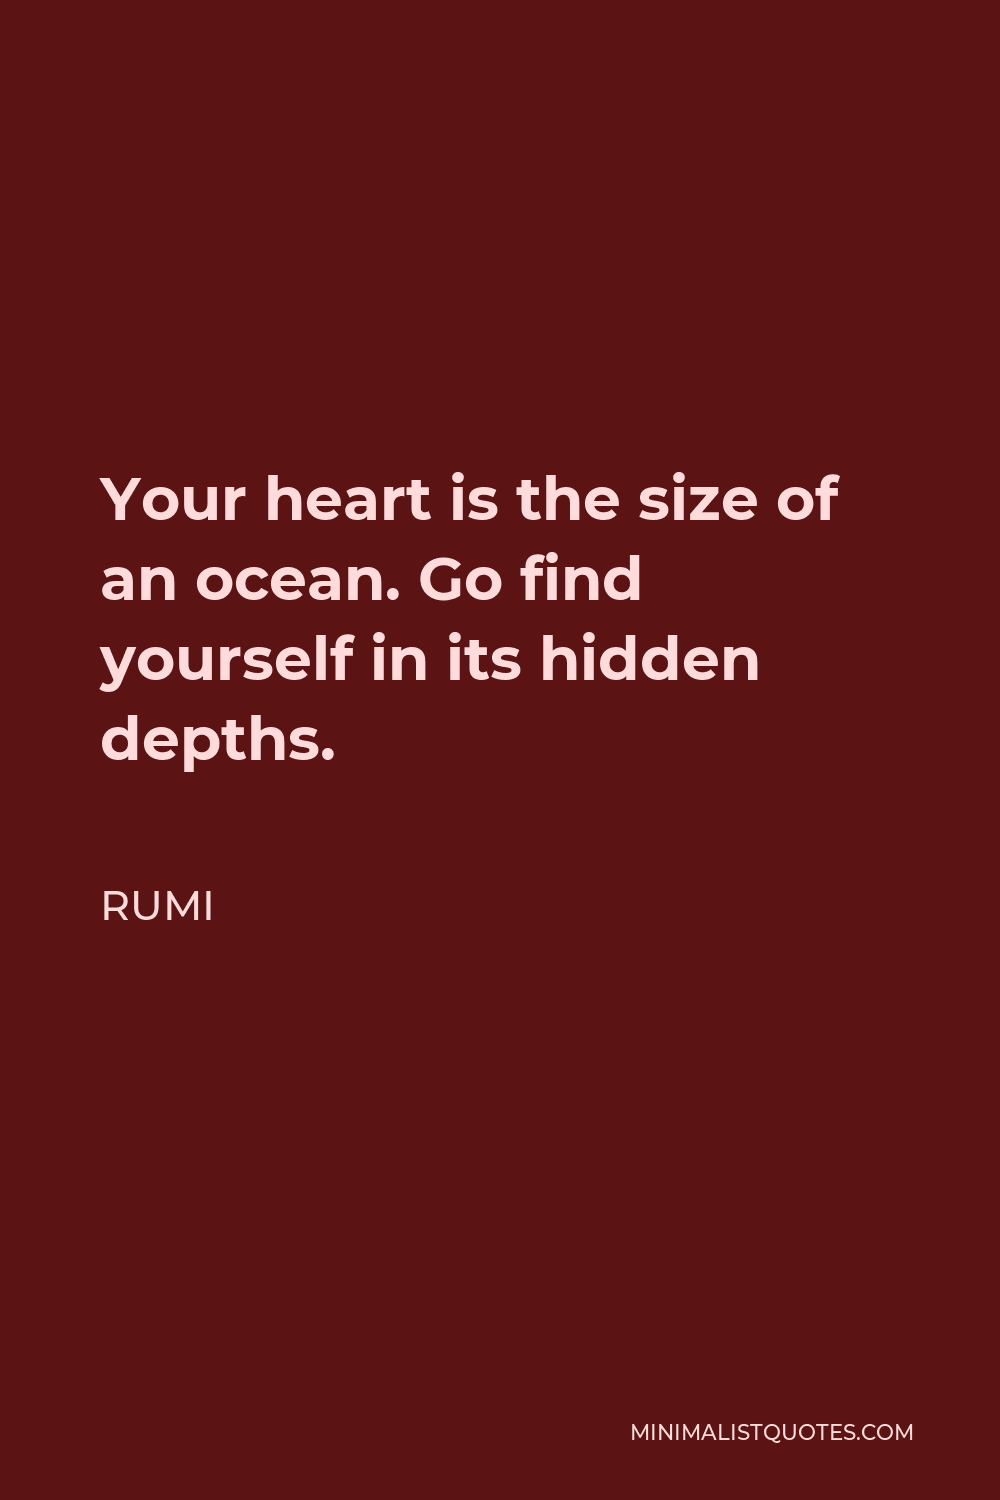 Rumi Quote - Your heart is the size of an ocean. Go find yourself in its hidden depths.